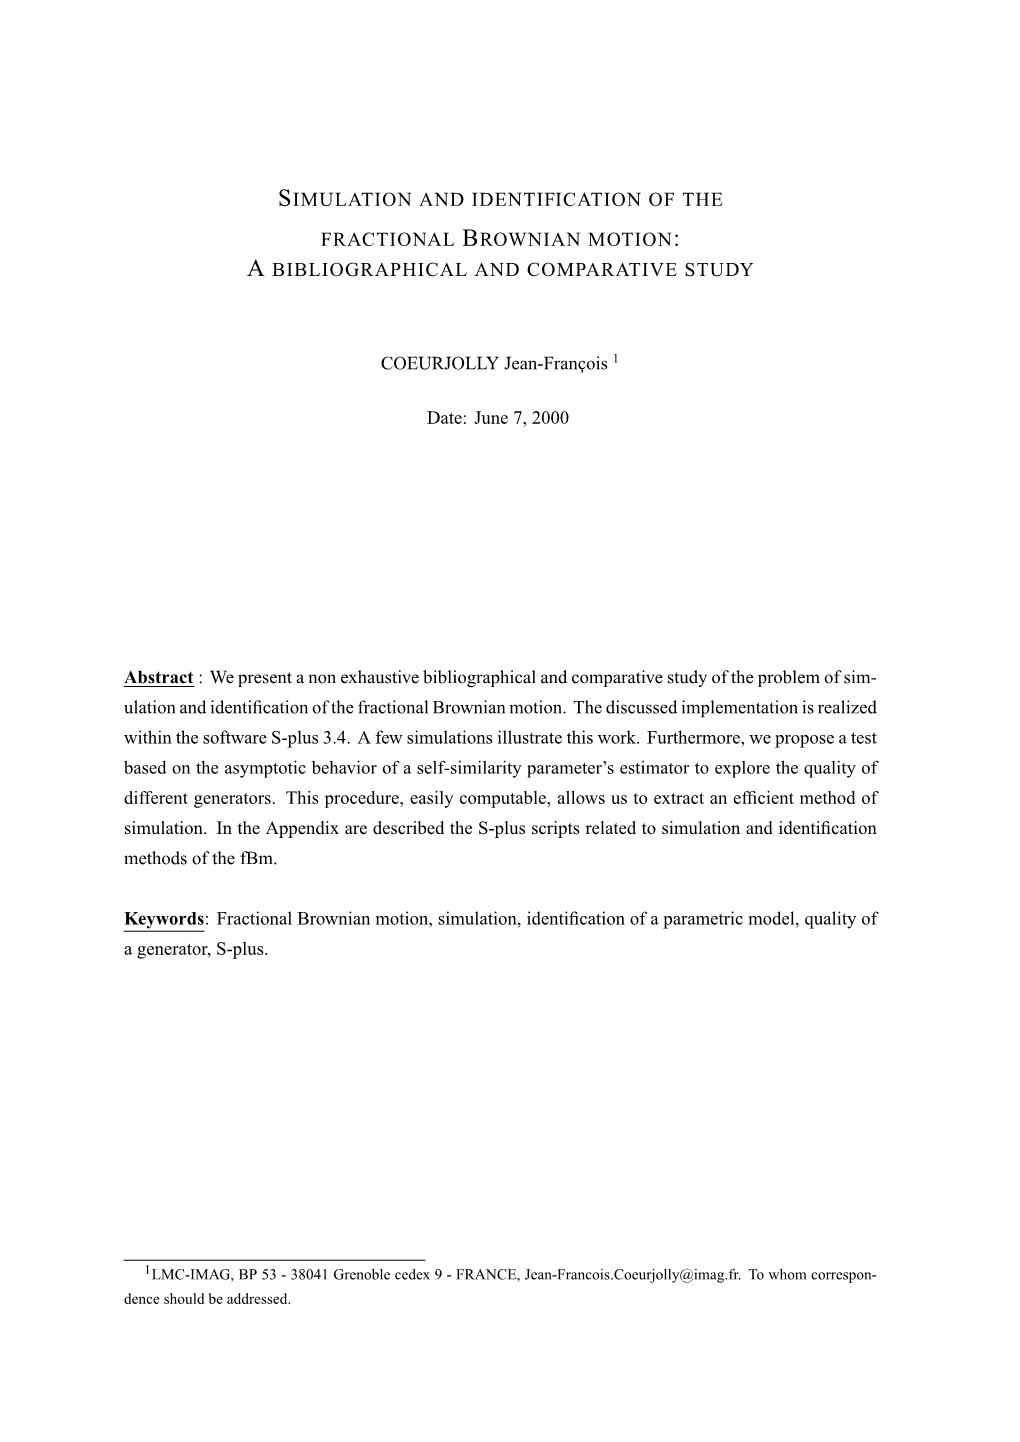 Simulation and Identification of the Fractional Brownianmotion: a Bibliographical and Comparative Study